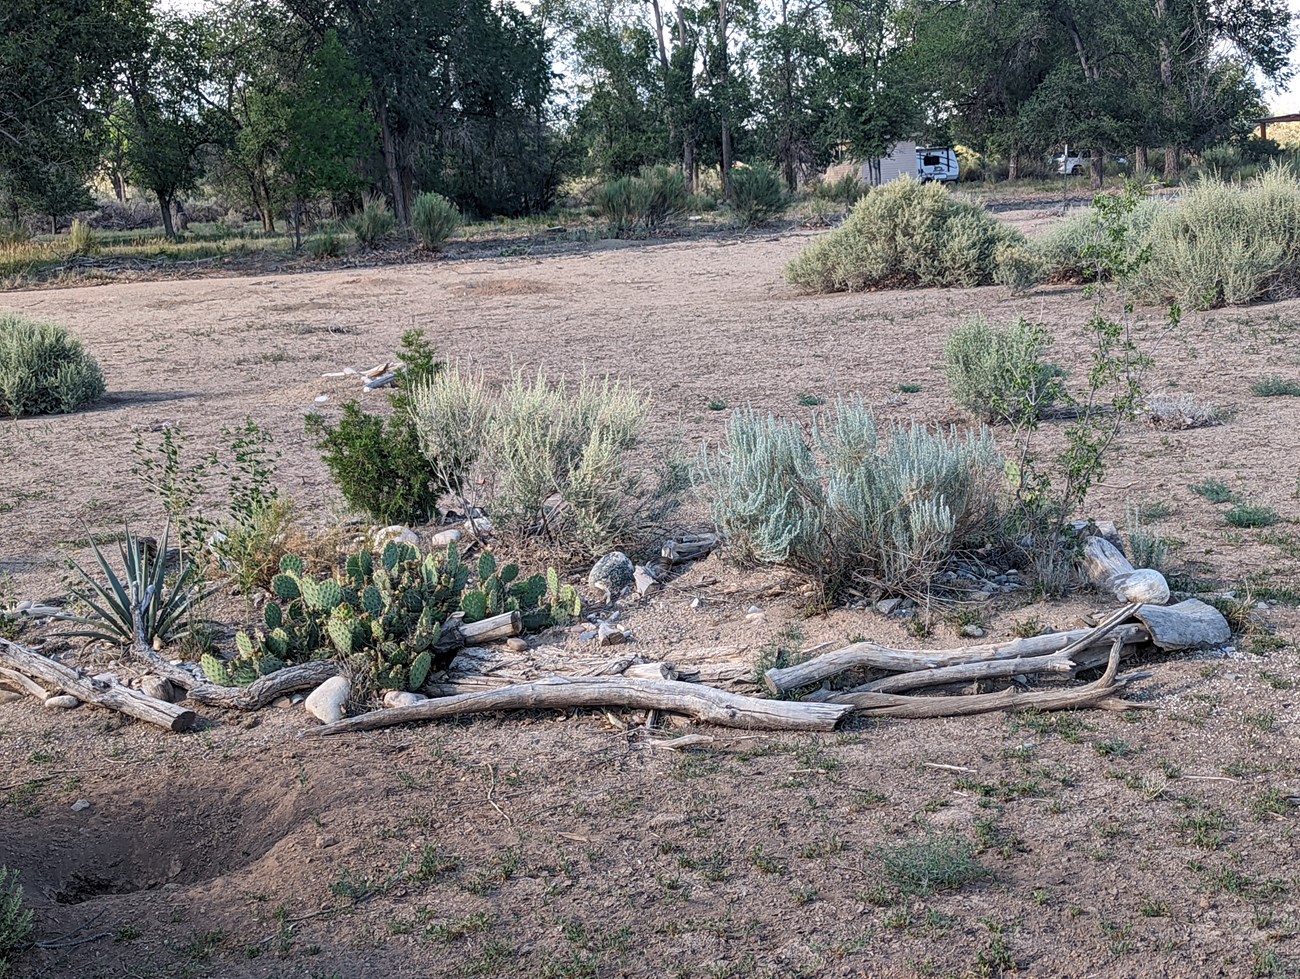 A planting of indigenous flora at Aztec Ruins, surrounded by branches, in a previous agricultural field. Plants include sagebrush, agave, and prickly pear cactus.